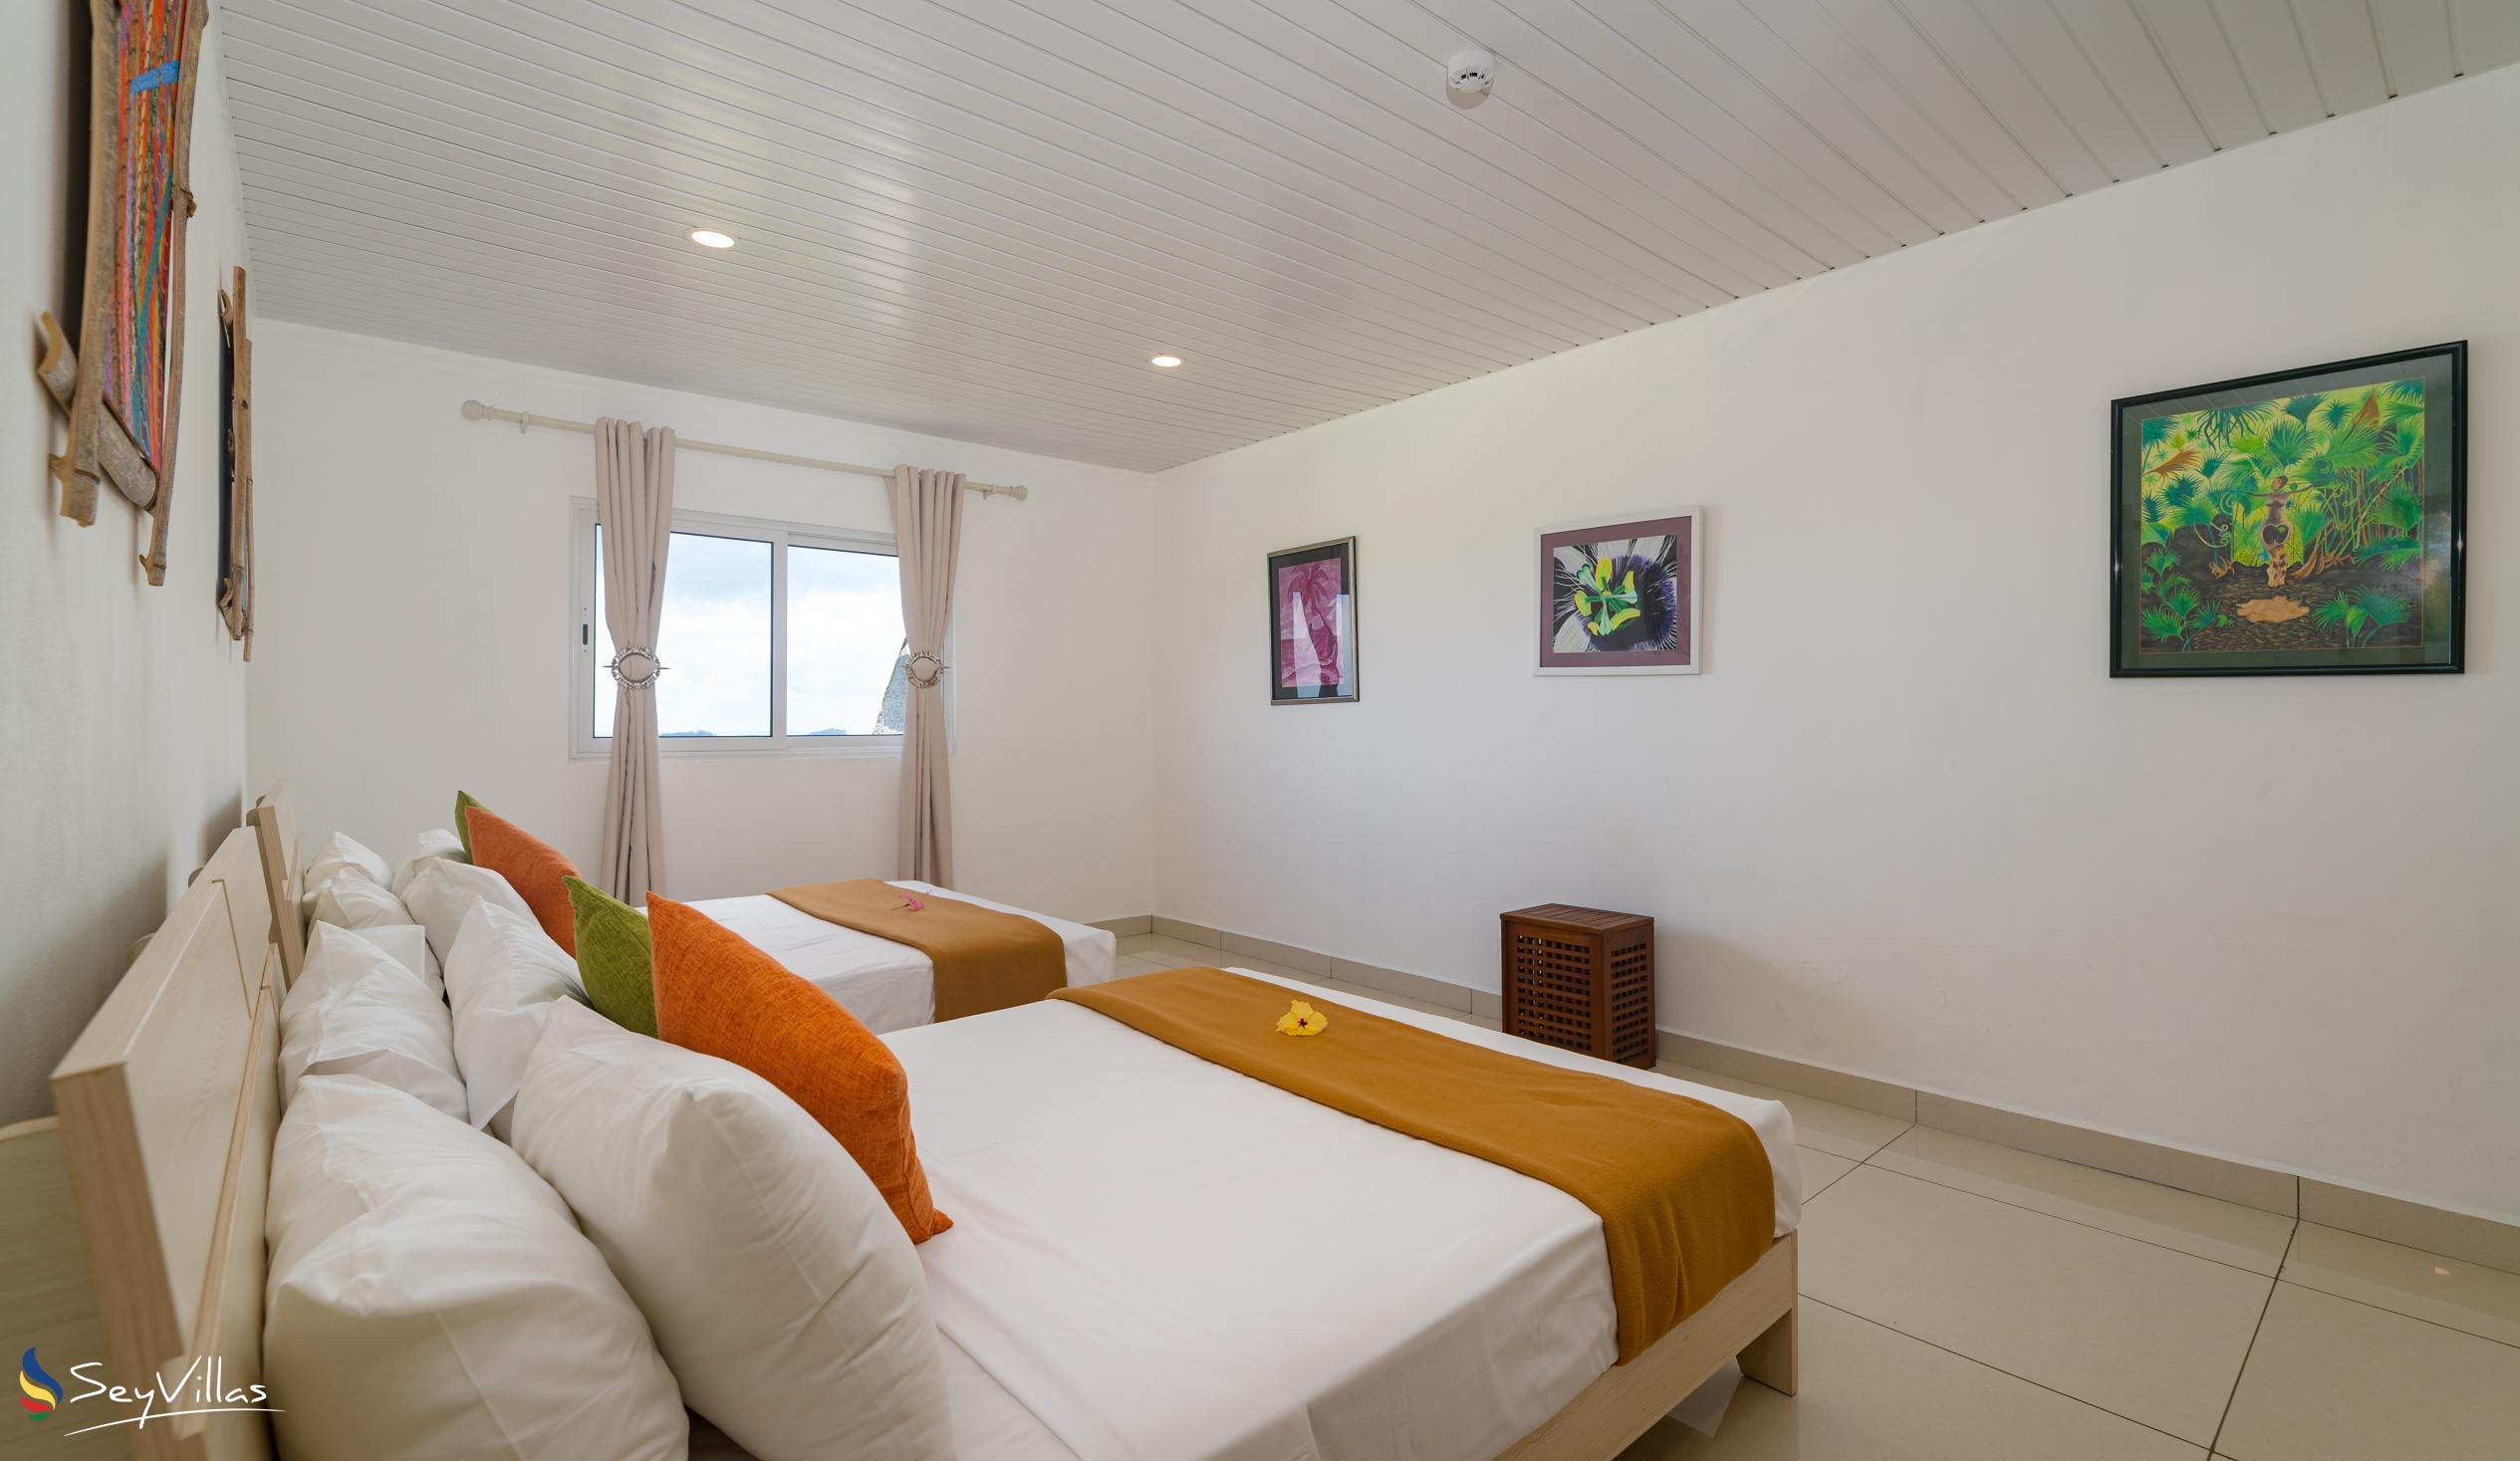 Photo 82: Creole Pearl Self Catering - 2-Bedroom Apartment - Mahé (Seychelles)